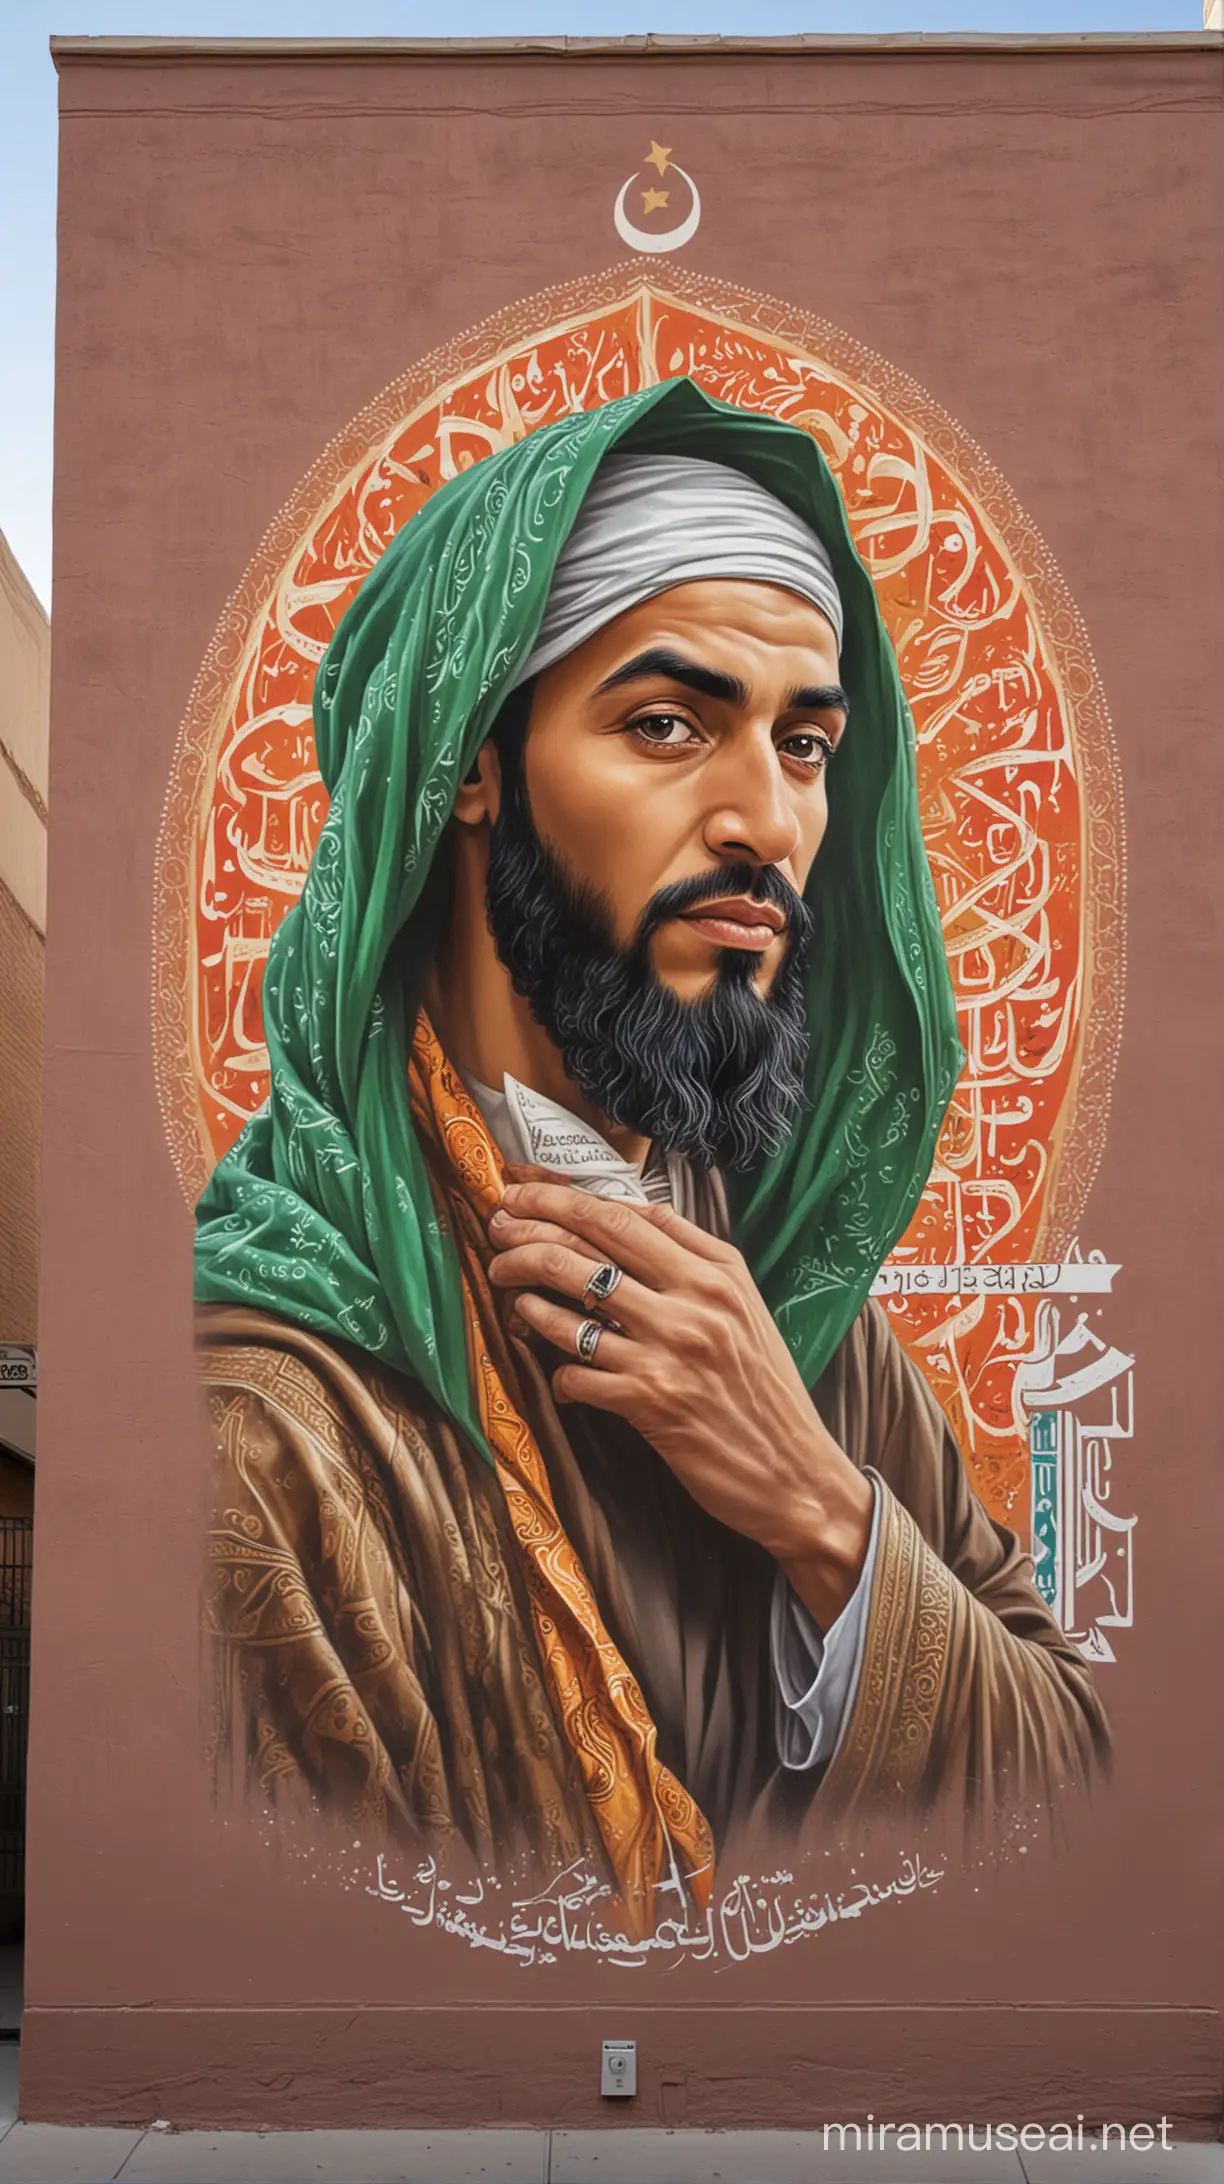 Subject: A mural illustrating Prophet Muhammad's teachings on human rights and equality, with the adoption of Zayd ibn Harithah as a central element.
Style: Public art, using bold colors and stylized figures to convey a message of social justice and human dignity.